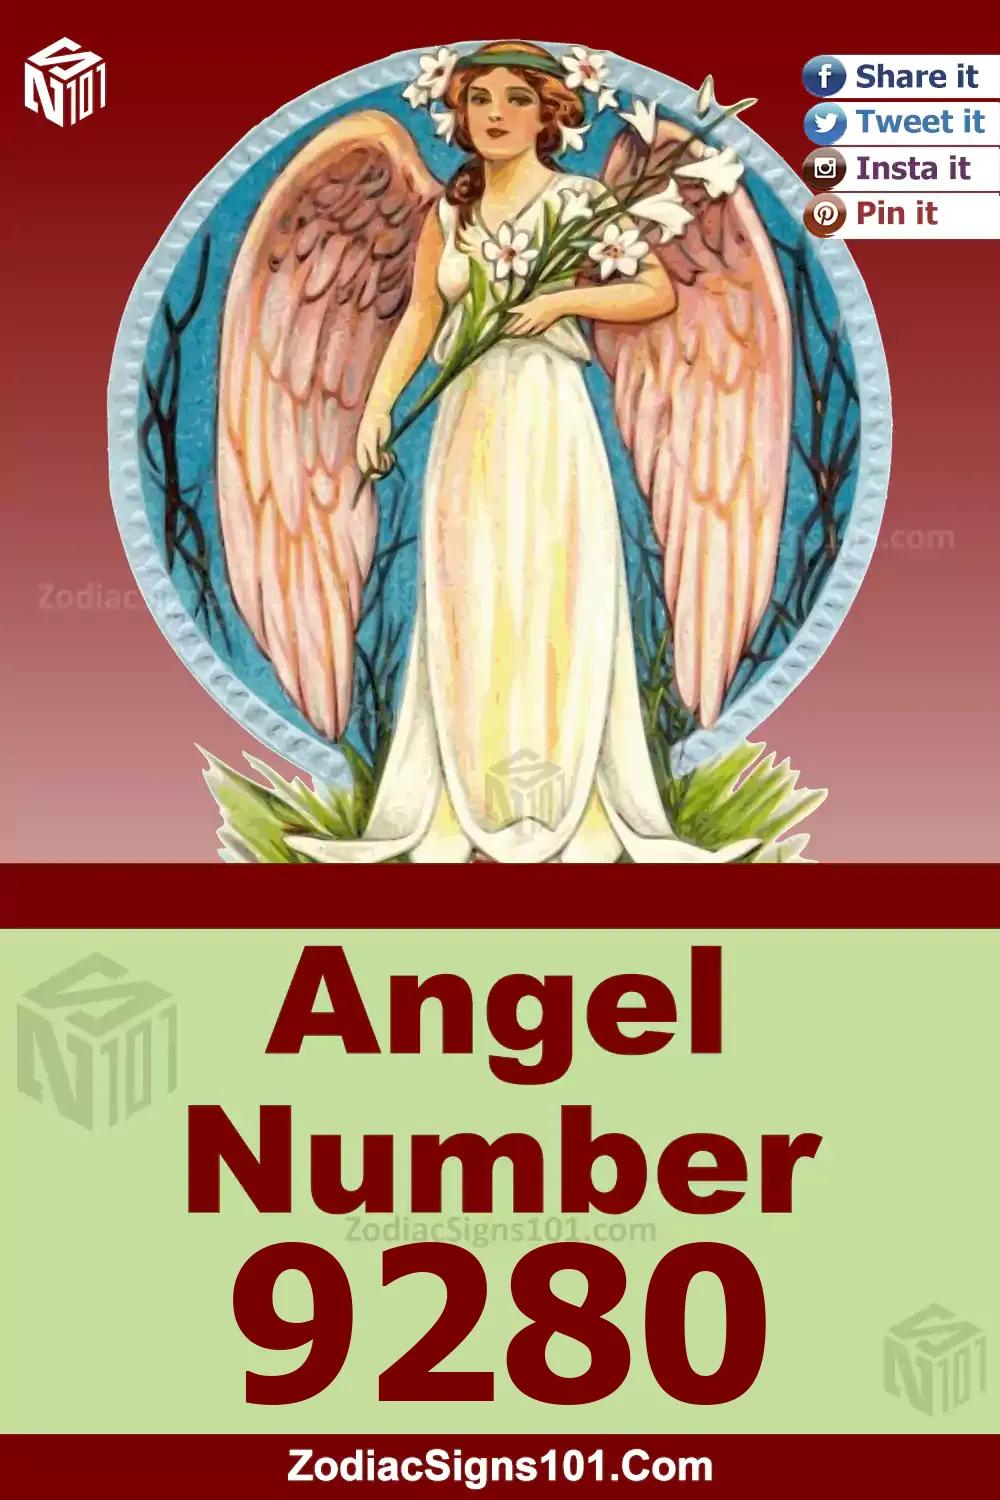 9280 Angel Number Meaning